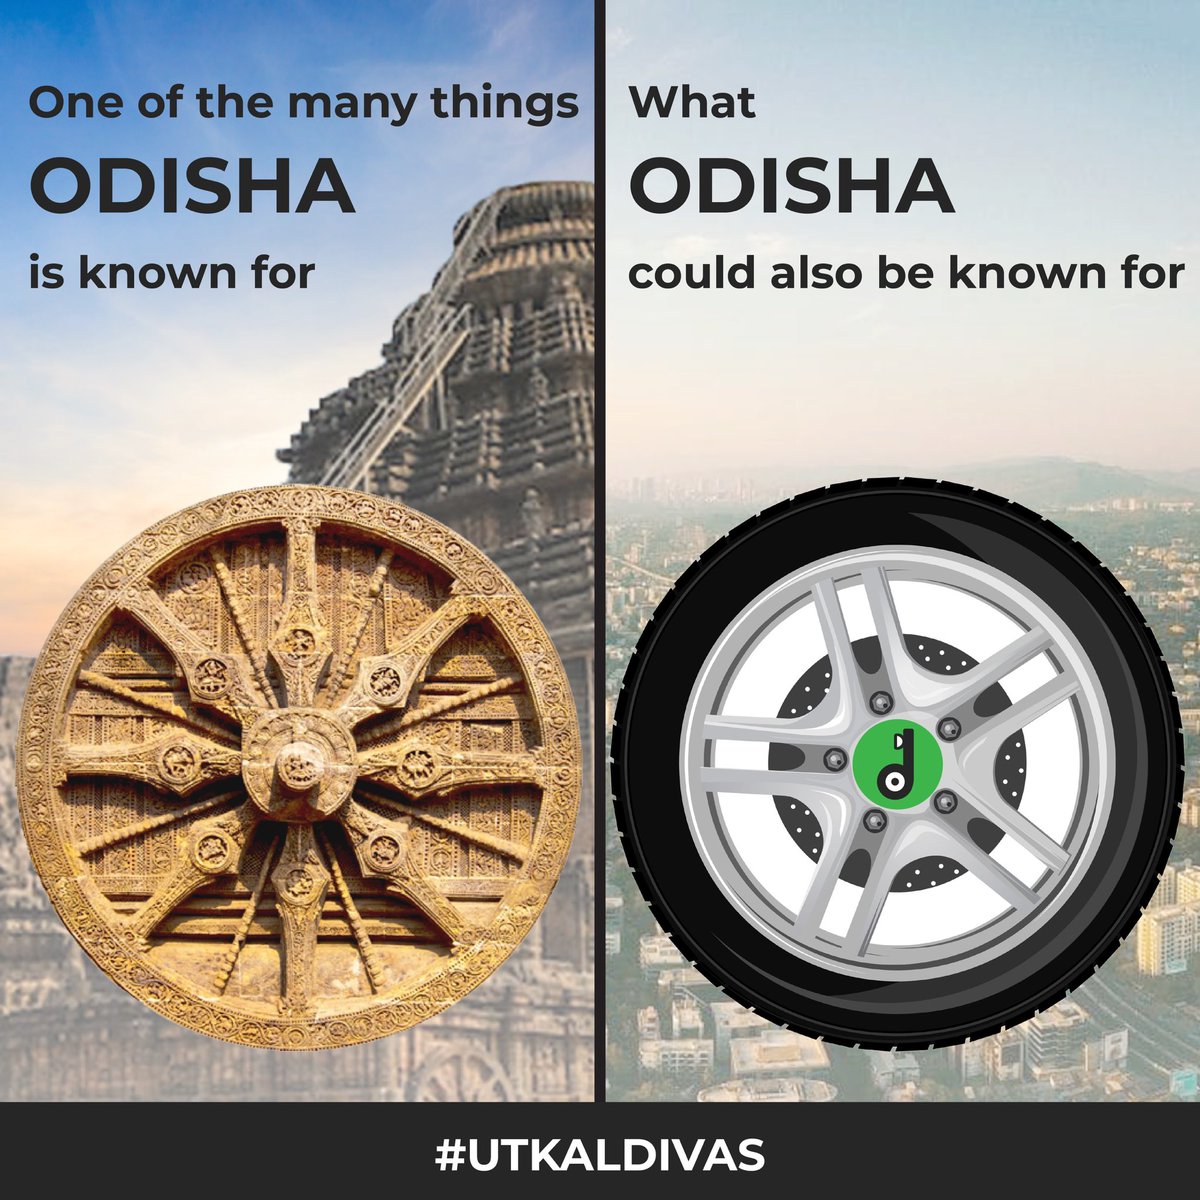 Let’s driEV is proud to have our roots in #Odisha, a state which is rich for its historical junctures and spectacular sceneries. On this #UtkalDivas, we cherish the beauty of this place while our e-bikes make way for the tourists and natives to explore this beautiful land.